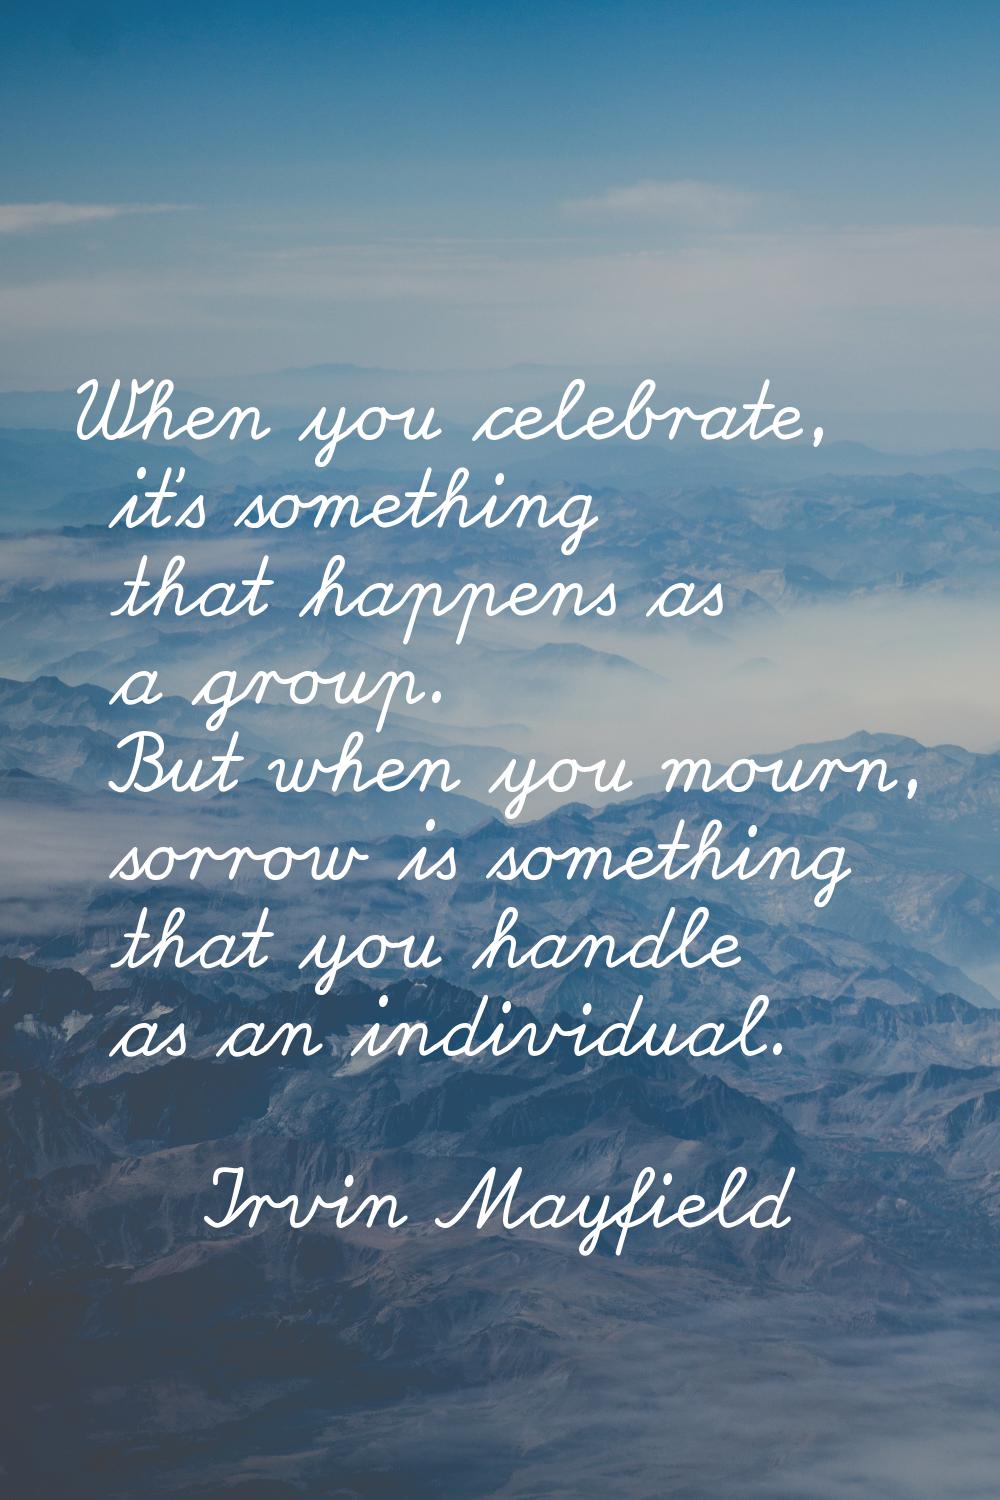 When you celebrate, it's something that happens as a group. But when you mourn, sorrow is something